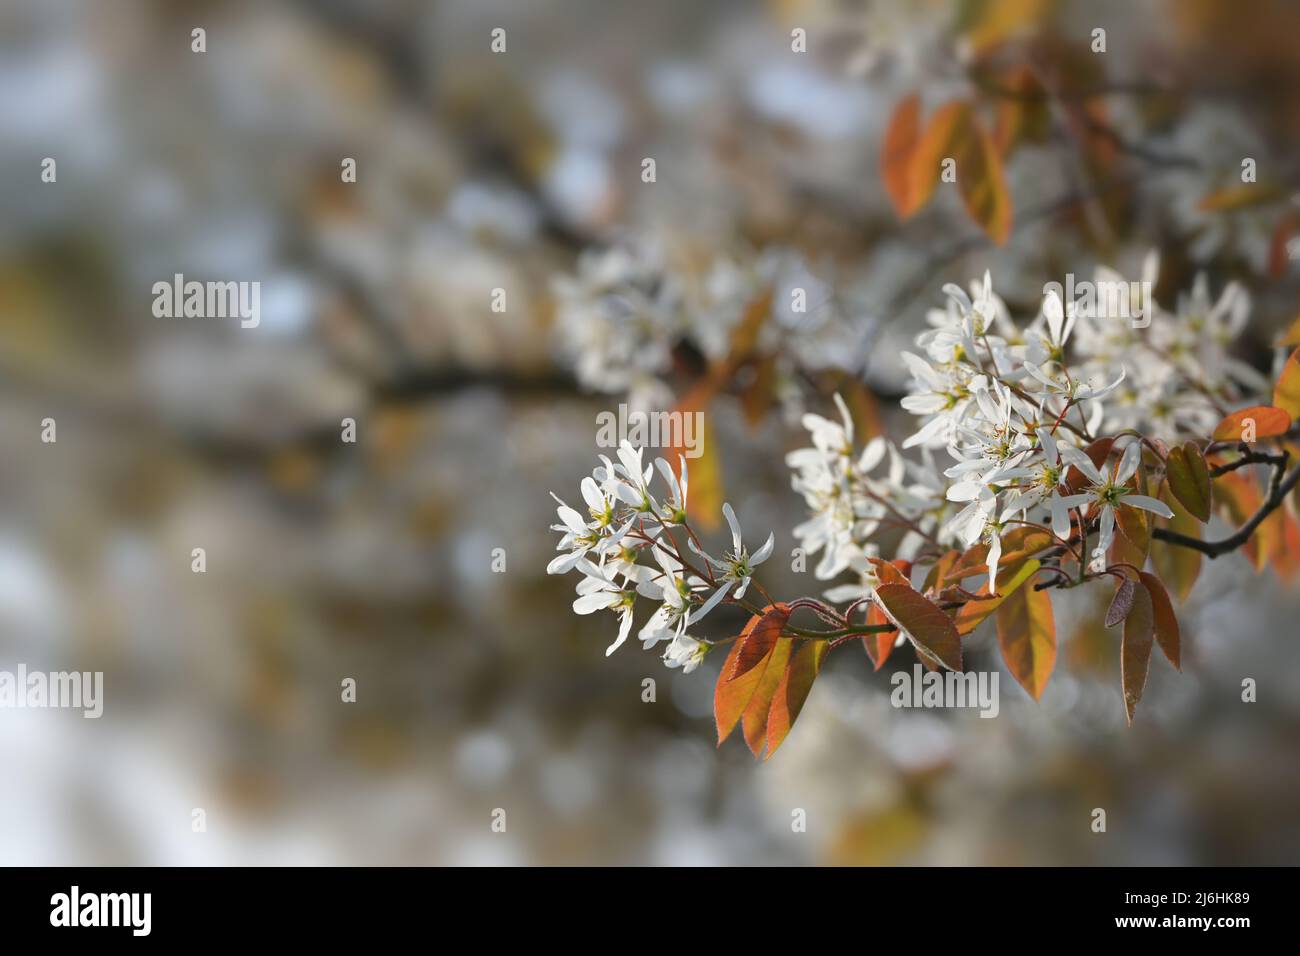 Amelanchier branch with white flowers and copper colored foliage in spring, copy space, selected focus, narrow depth of field Stock Photo